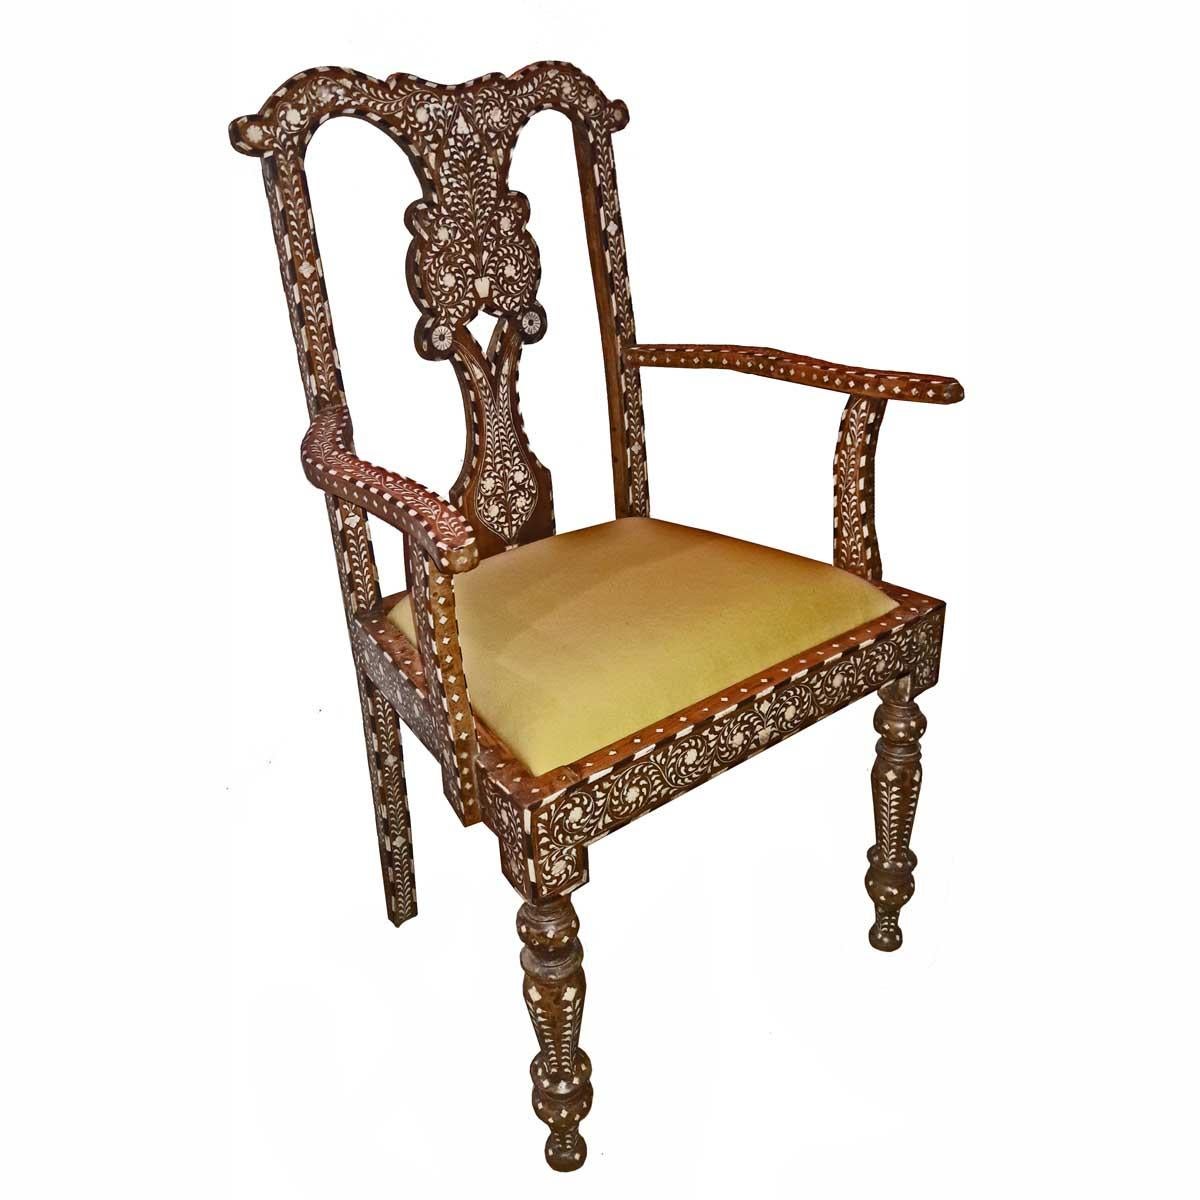 Bone-inlaid armchair, turned legs and back, from India, circa 1960. 
Removable cushion in yellow fabric that can be reupholstered. Each chair includes an extra removable cushion, which can also be reupholstered in any fabric. 

 Two chairs